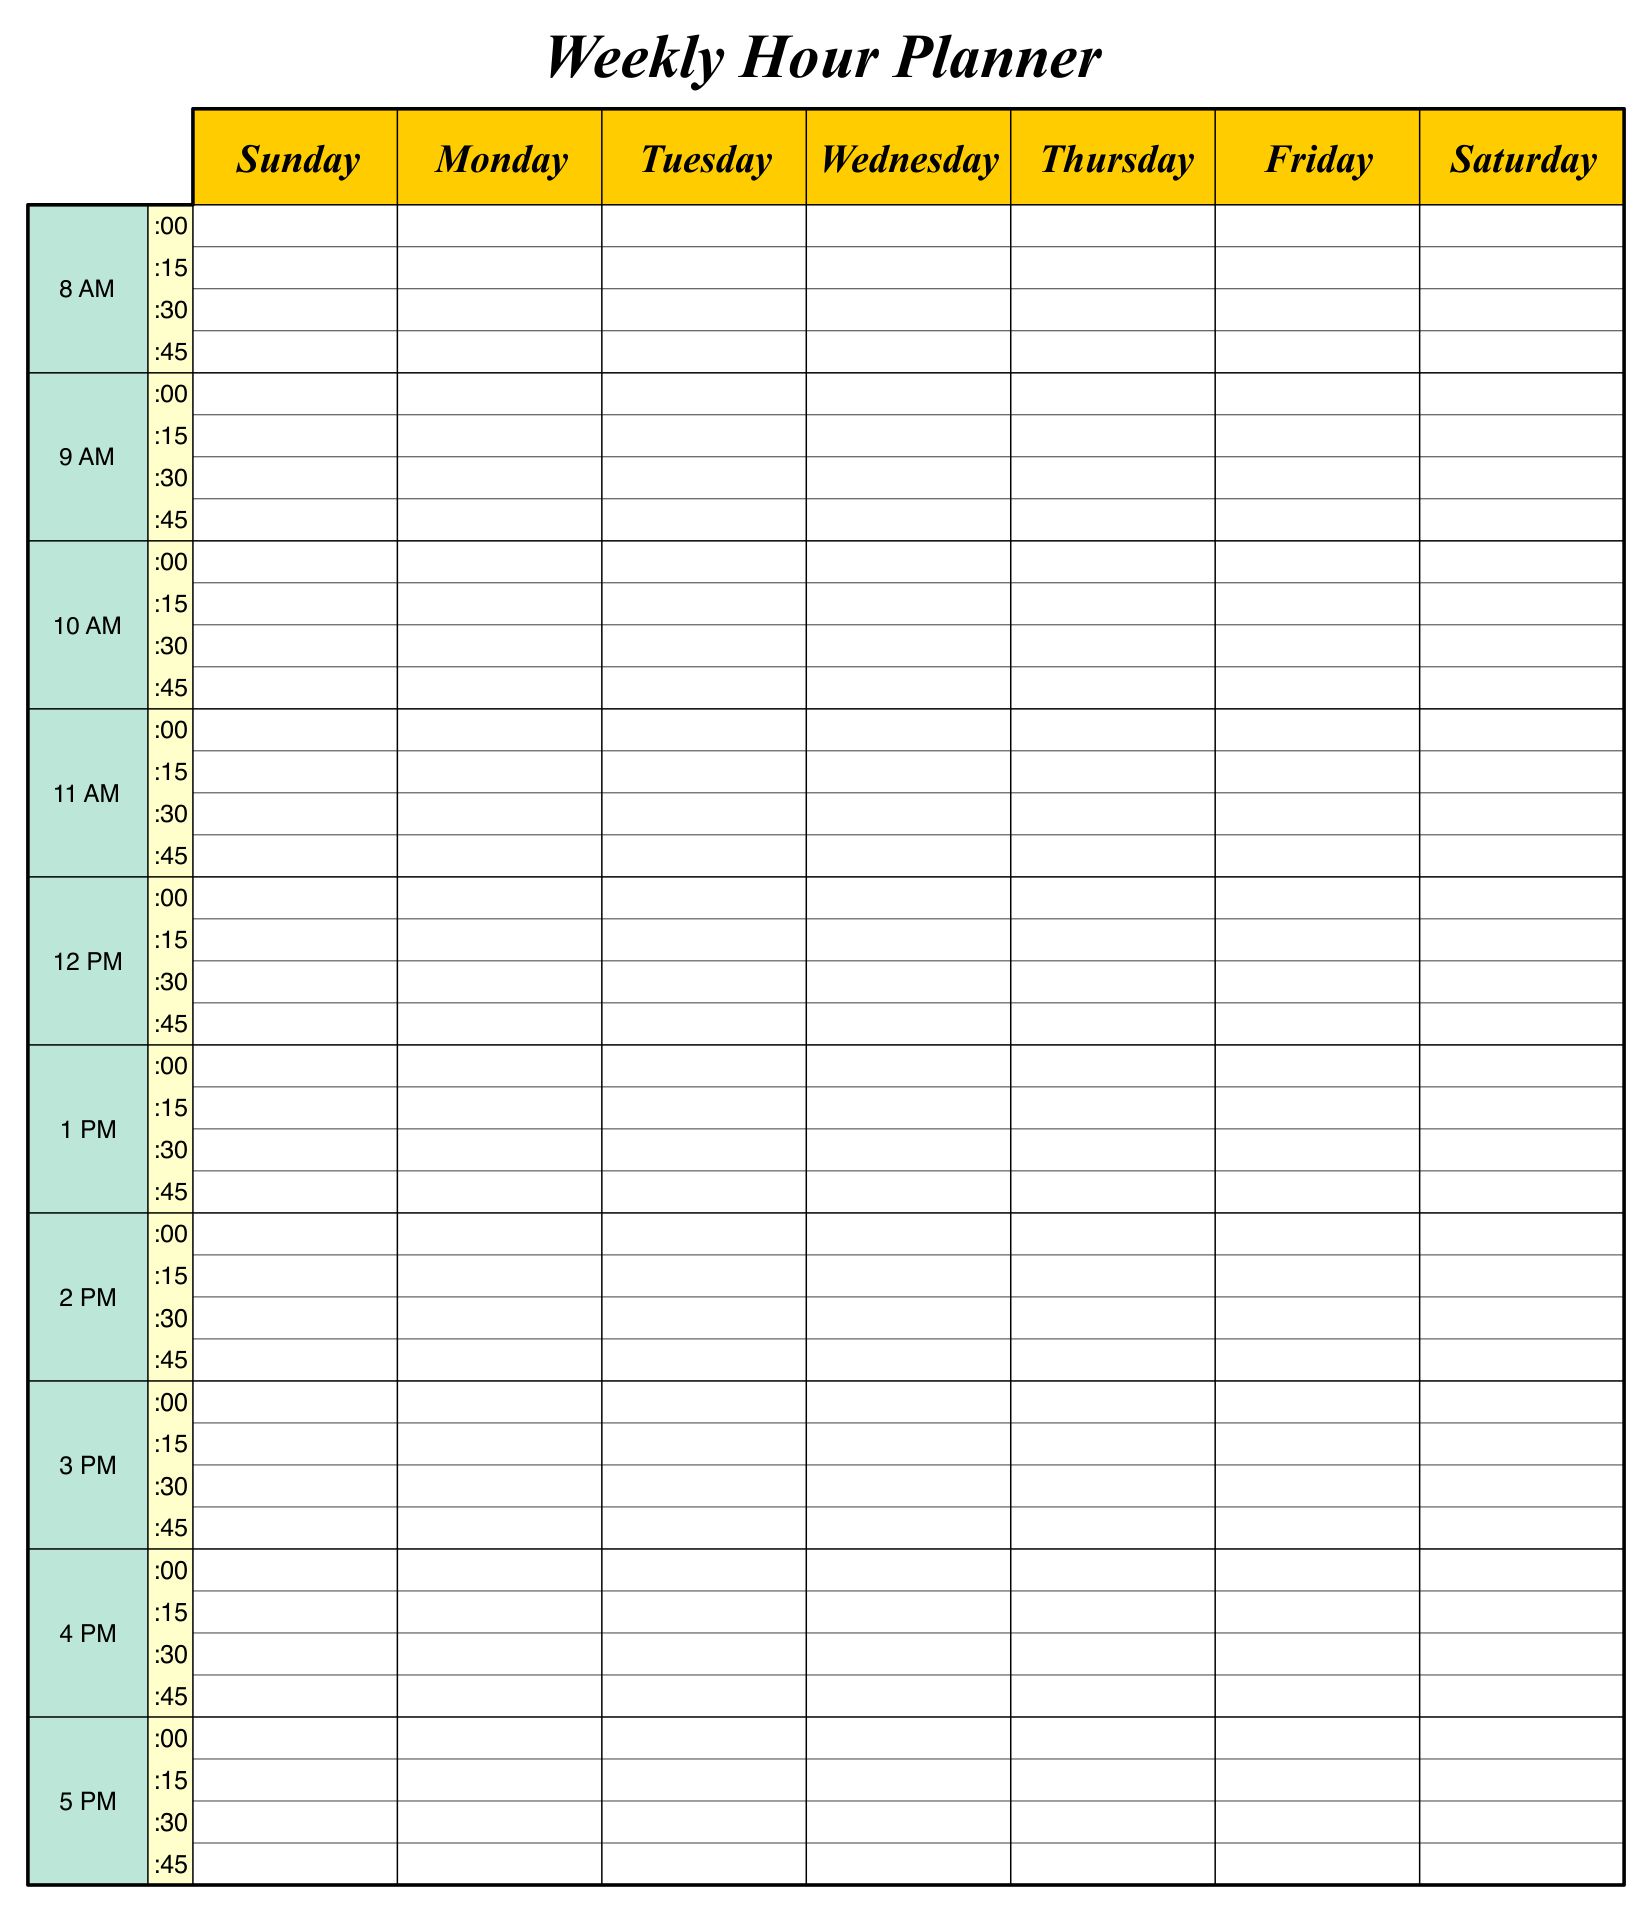 Weekly Hourly Schedule Template